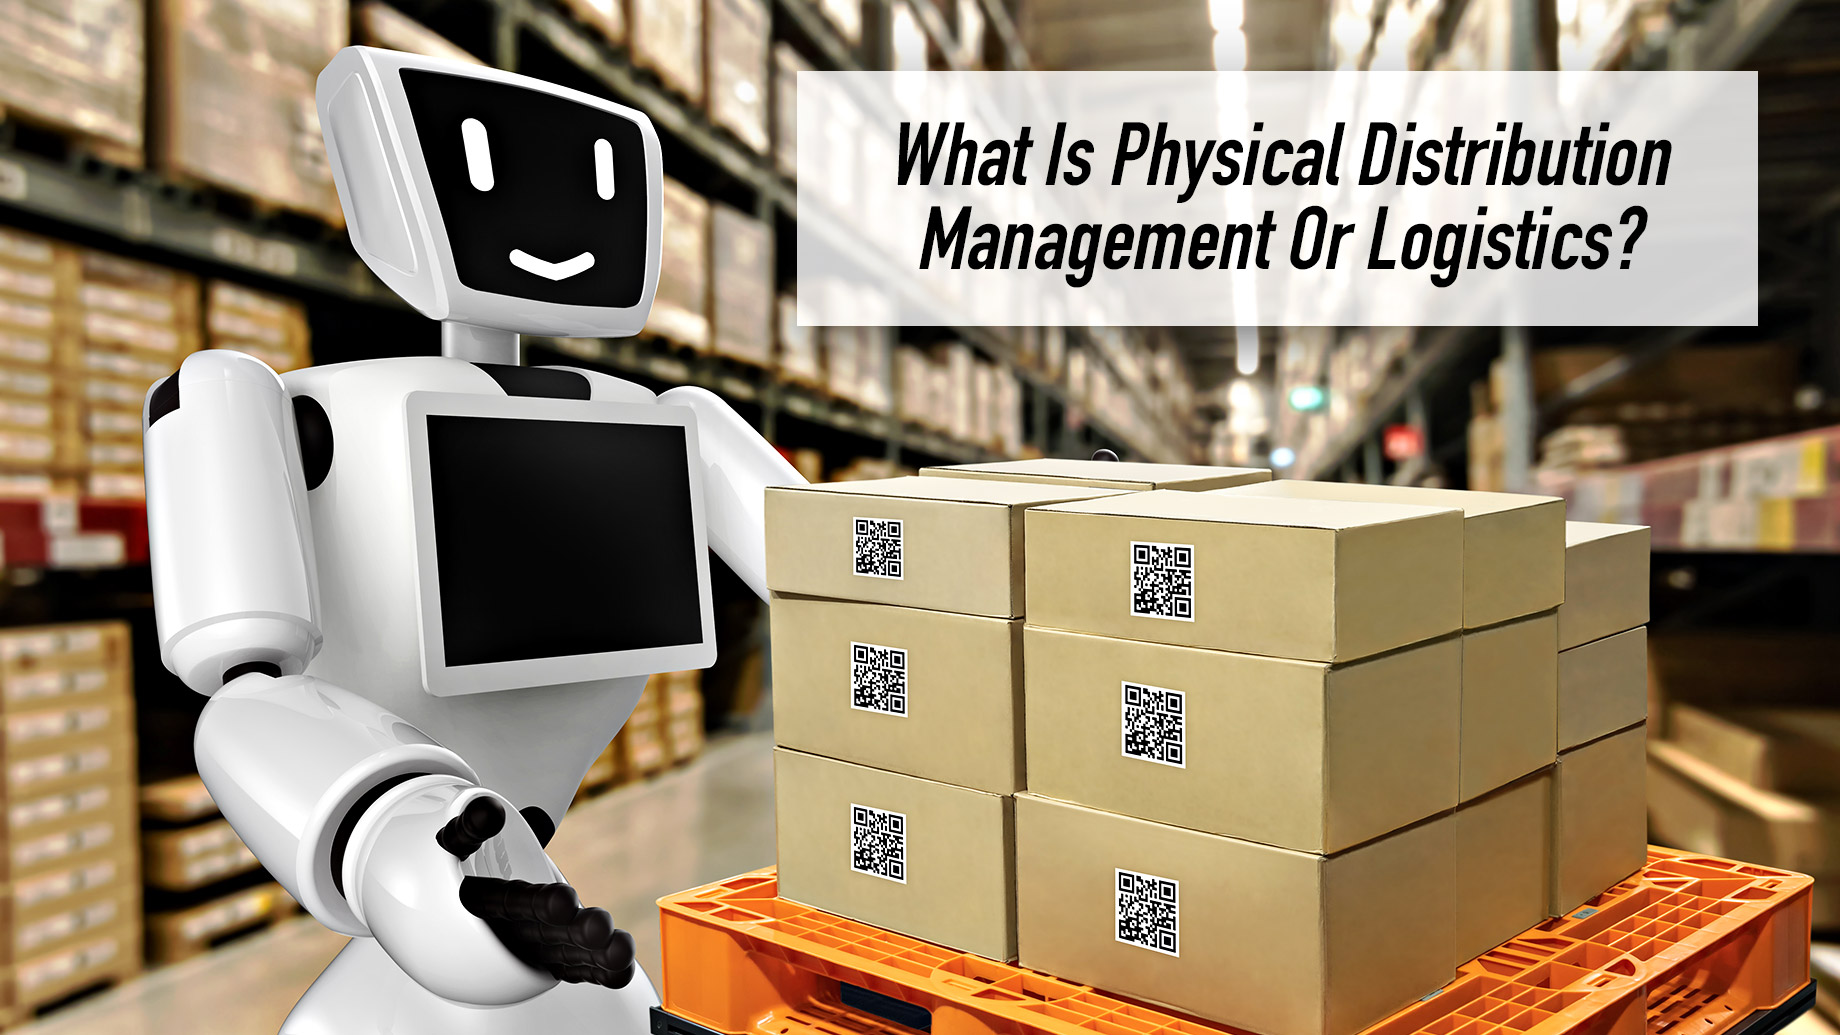 What Is Physical Distribution Management Or Logistics?